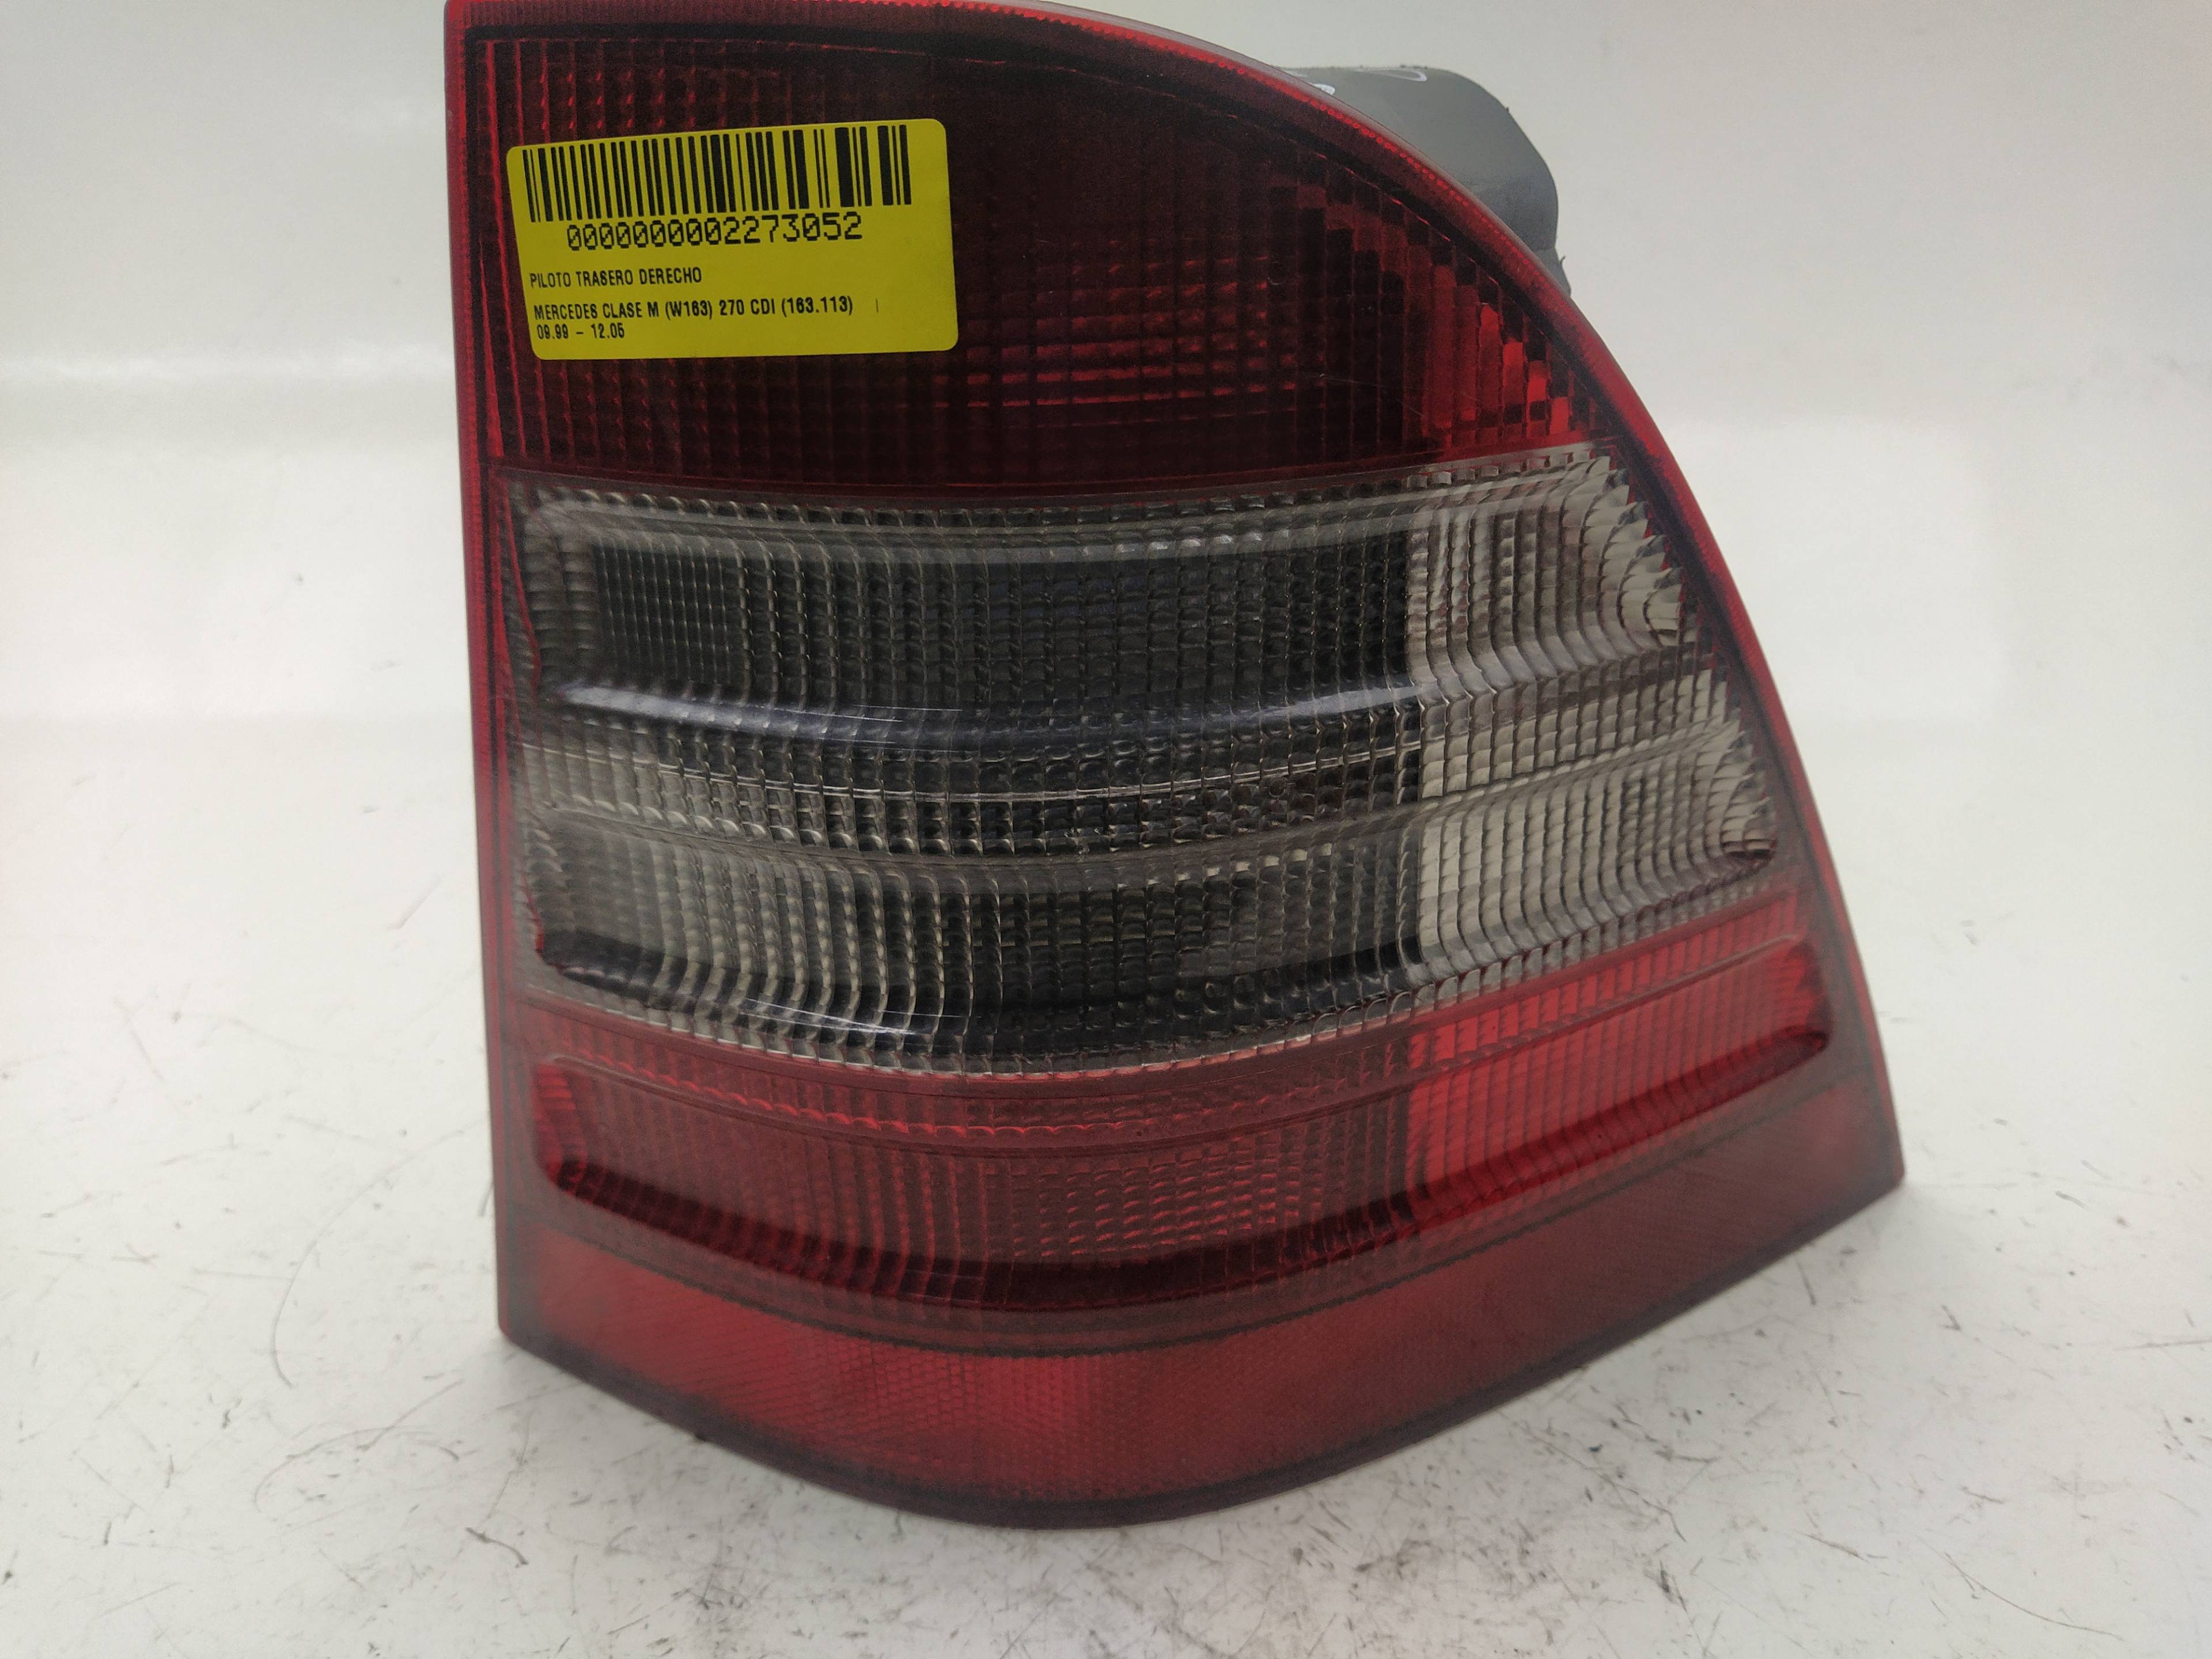 MERCEDES-BENZ M-Class W163 (1997-2005) Rear Right Taillight Lamp A1638200264 20697330